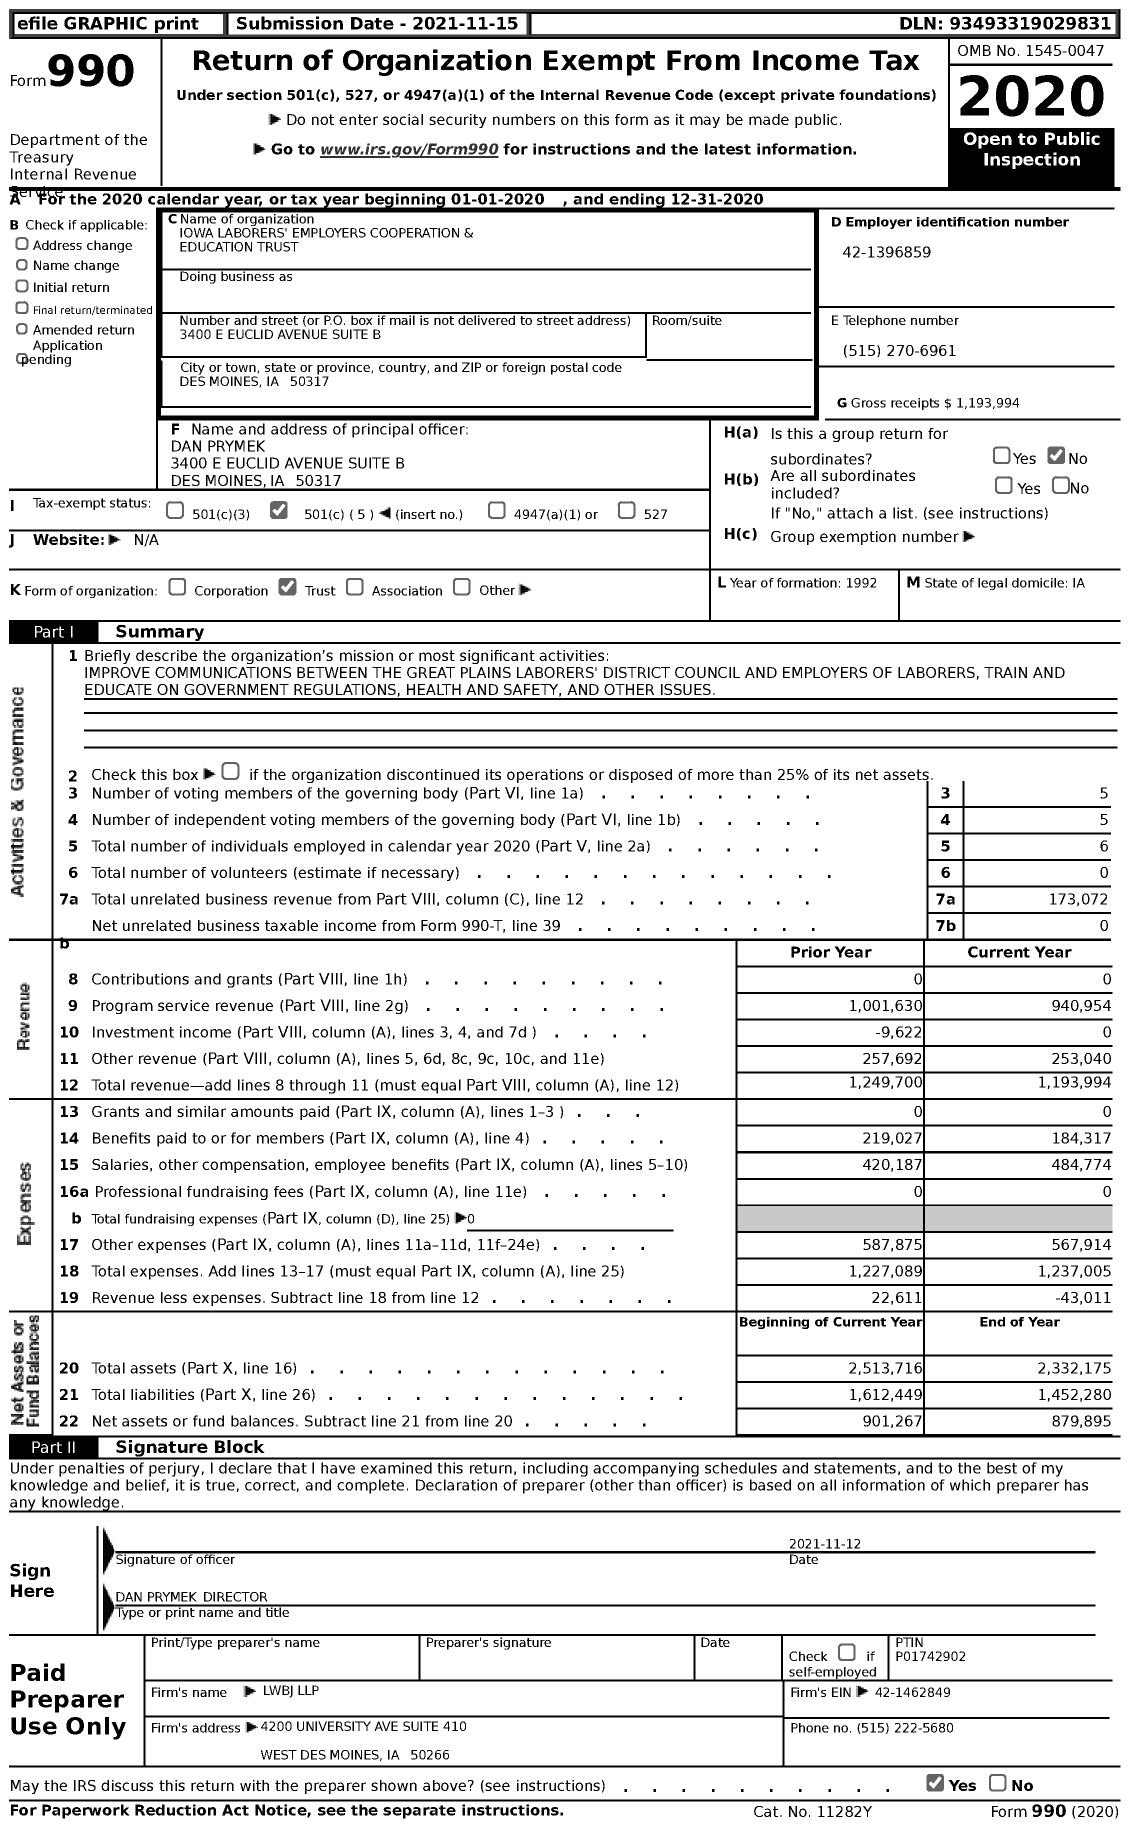 Image of first page of 2020 Form 990 for Iowa Laborers' Employers Cooperation and Education Trust